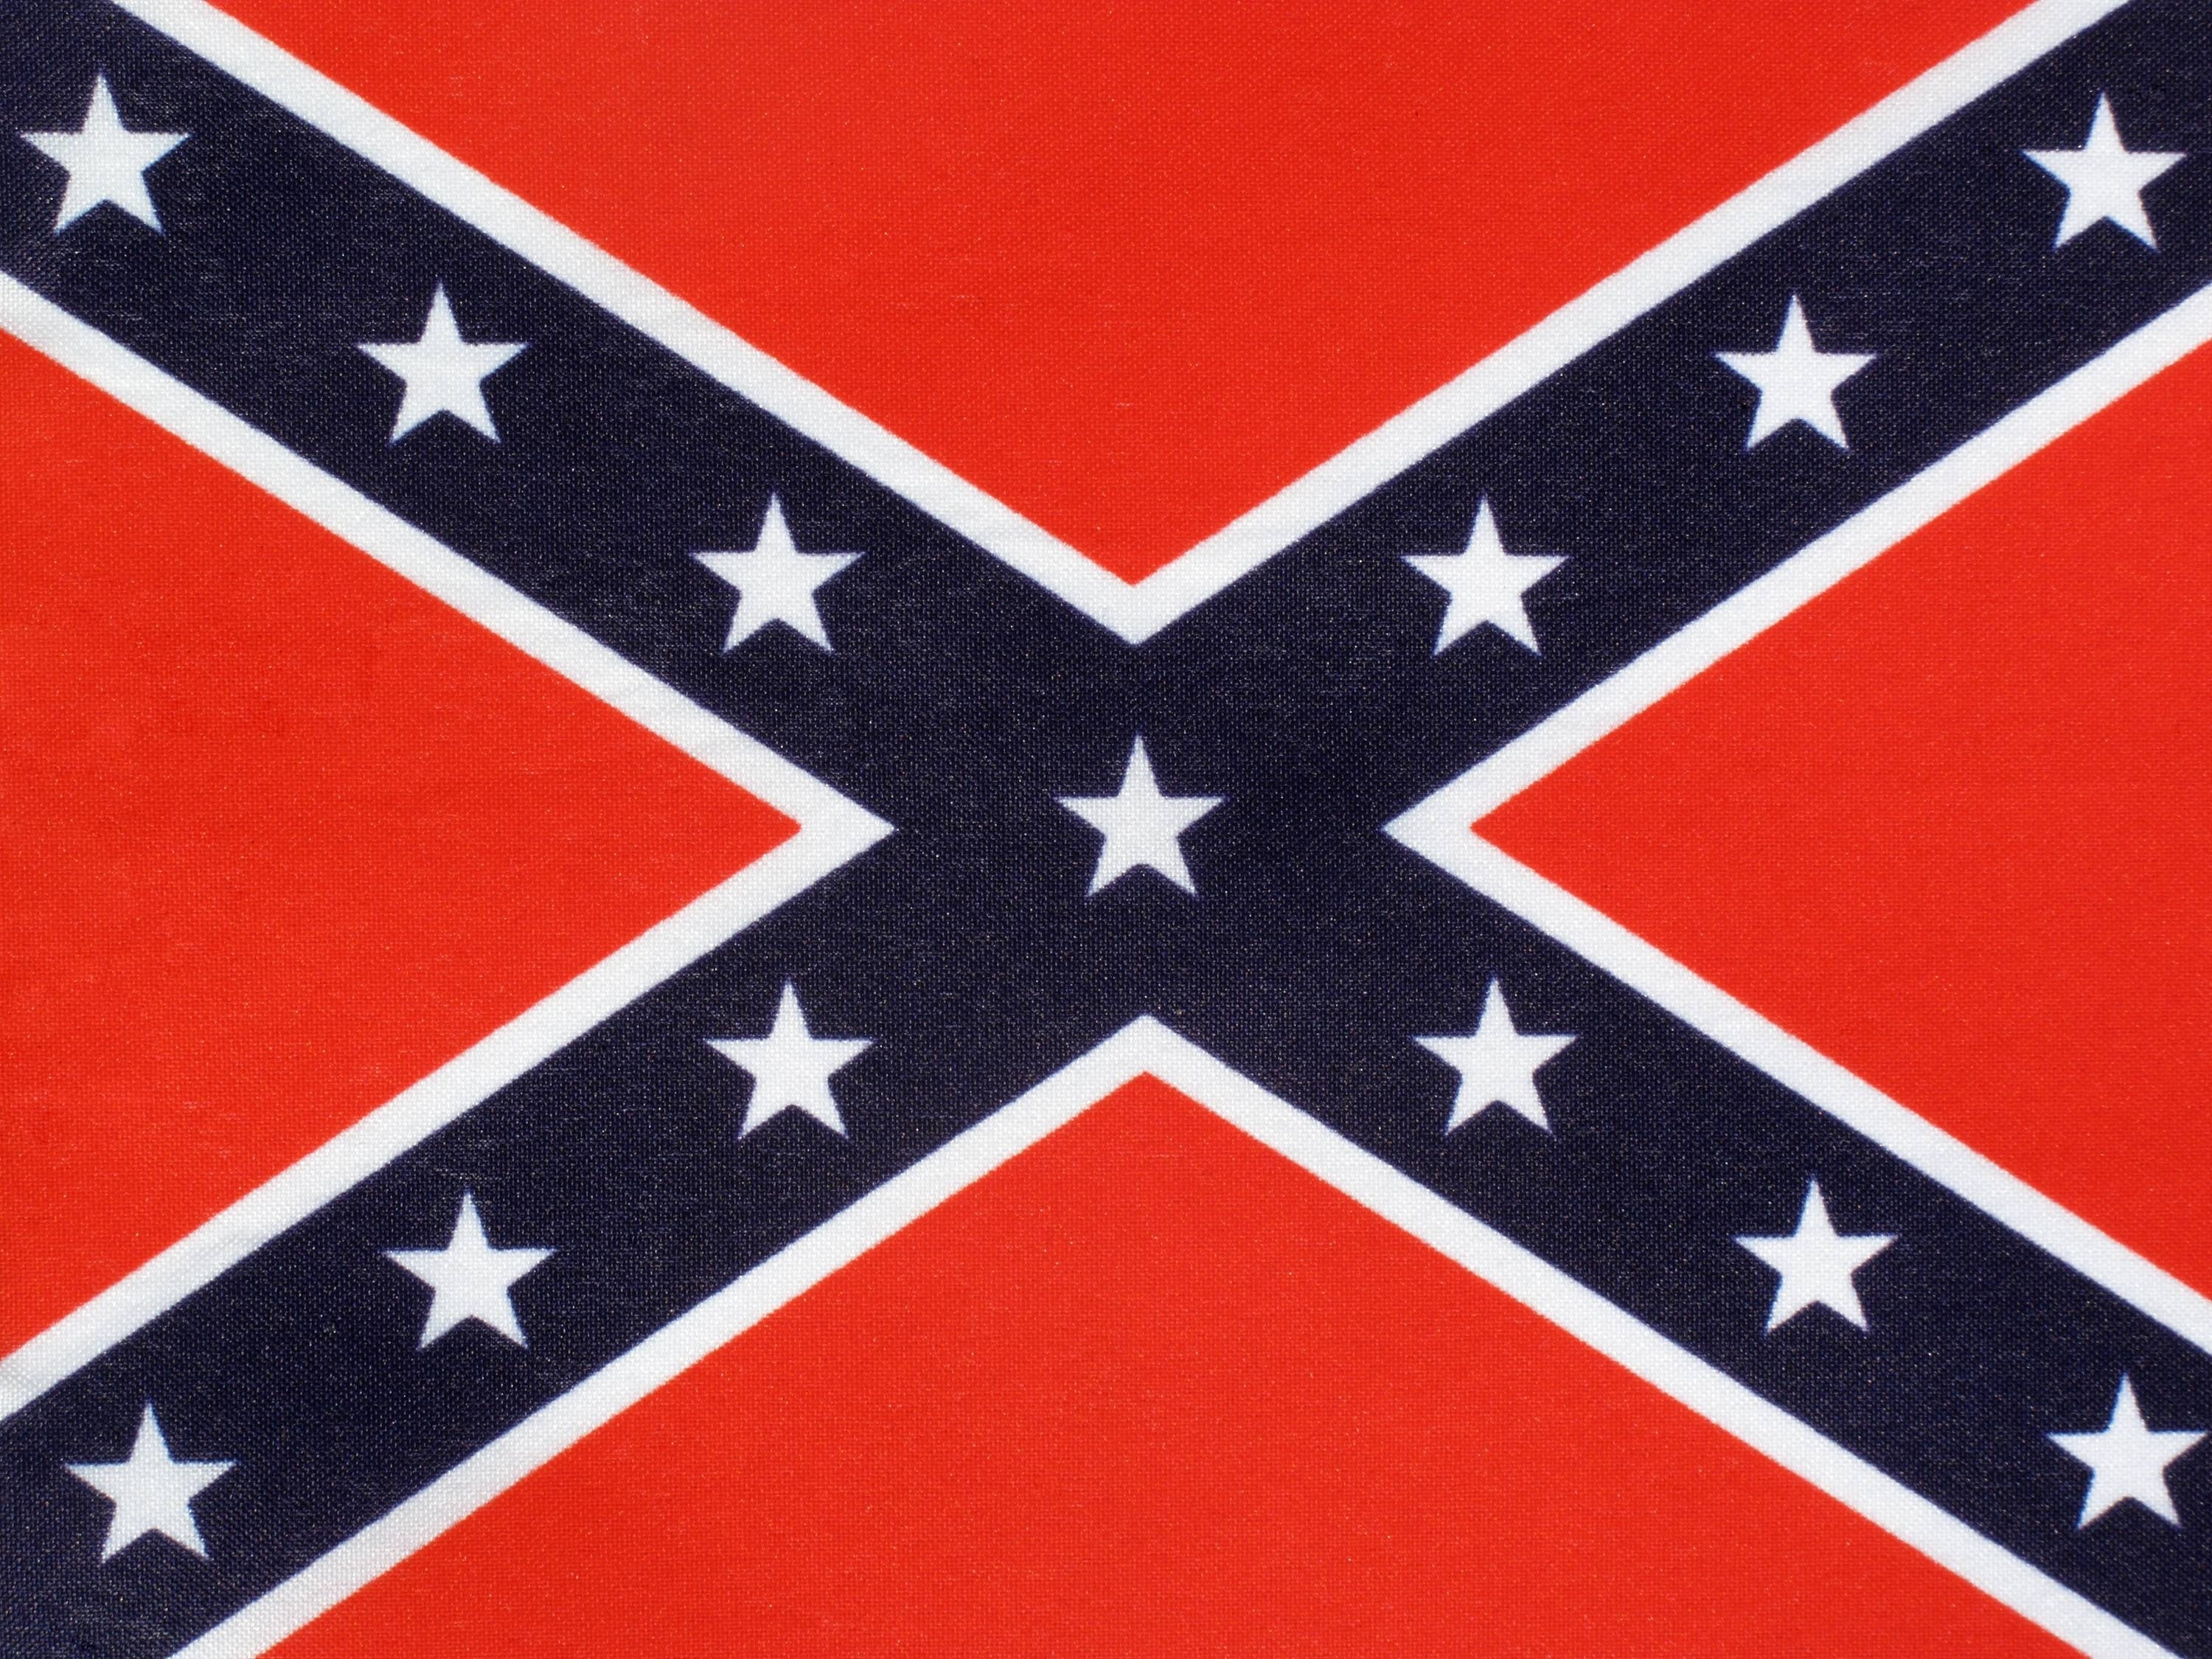 10 New Confederate Flag Desktop Background FULL HD 1920 × 1080 For PC.